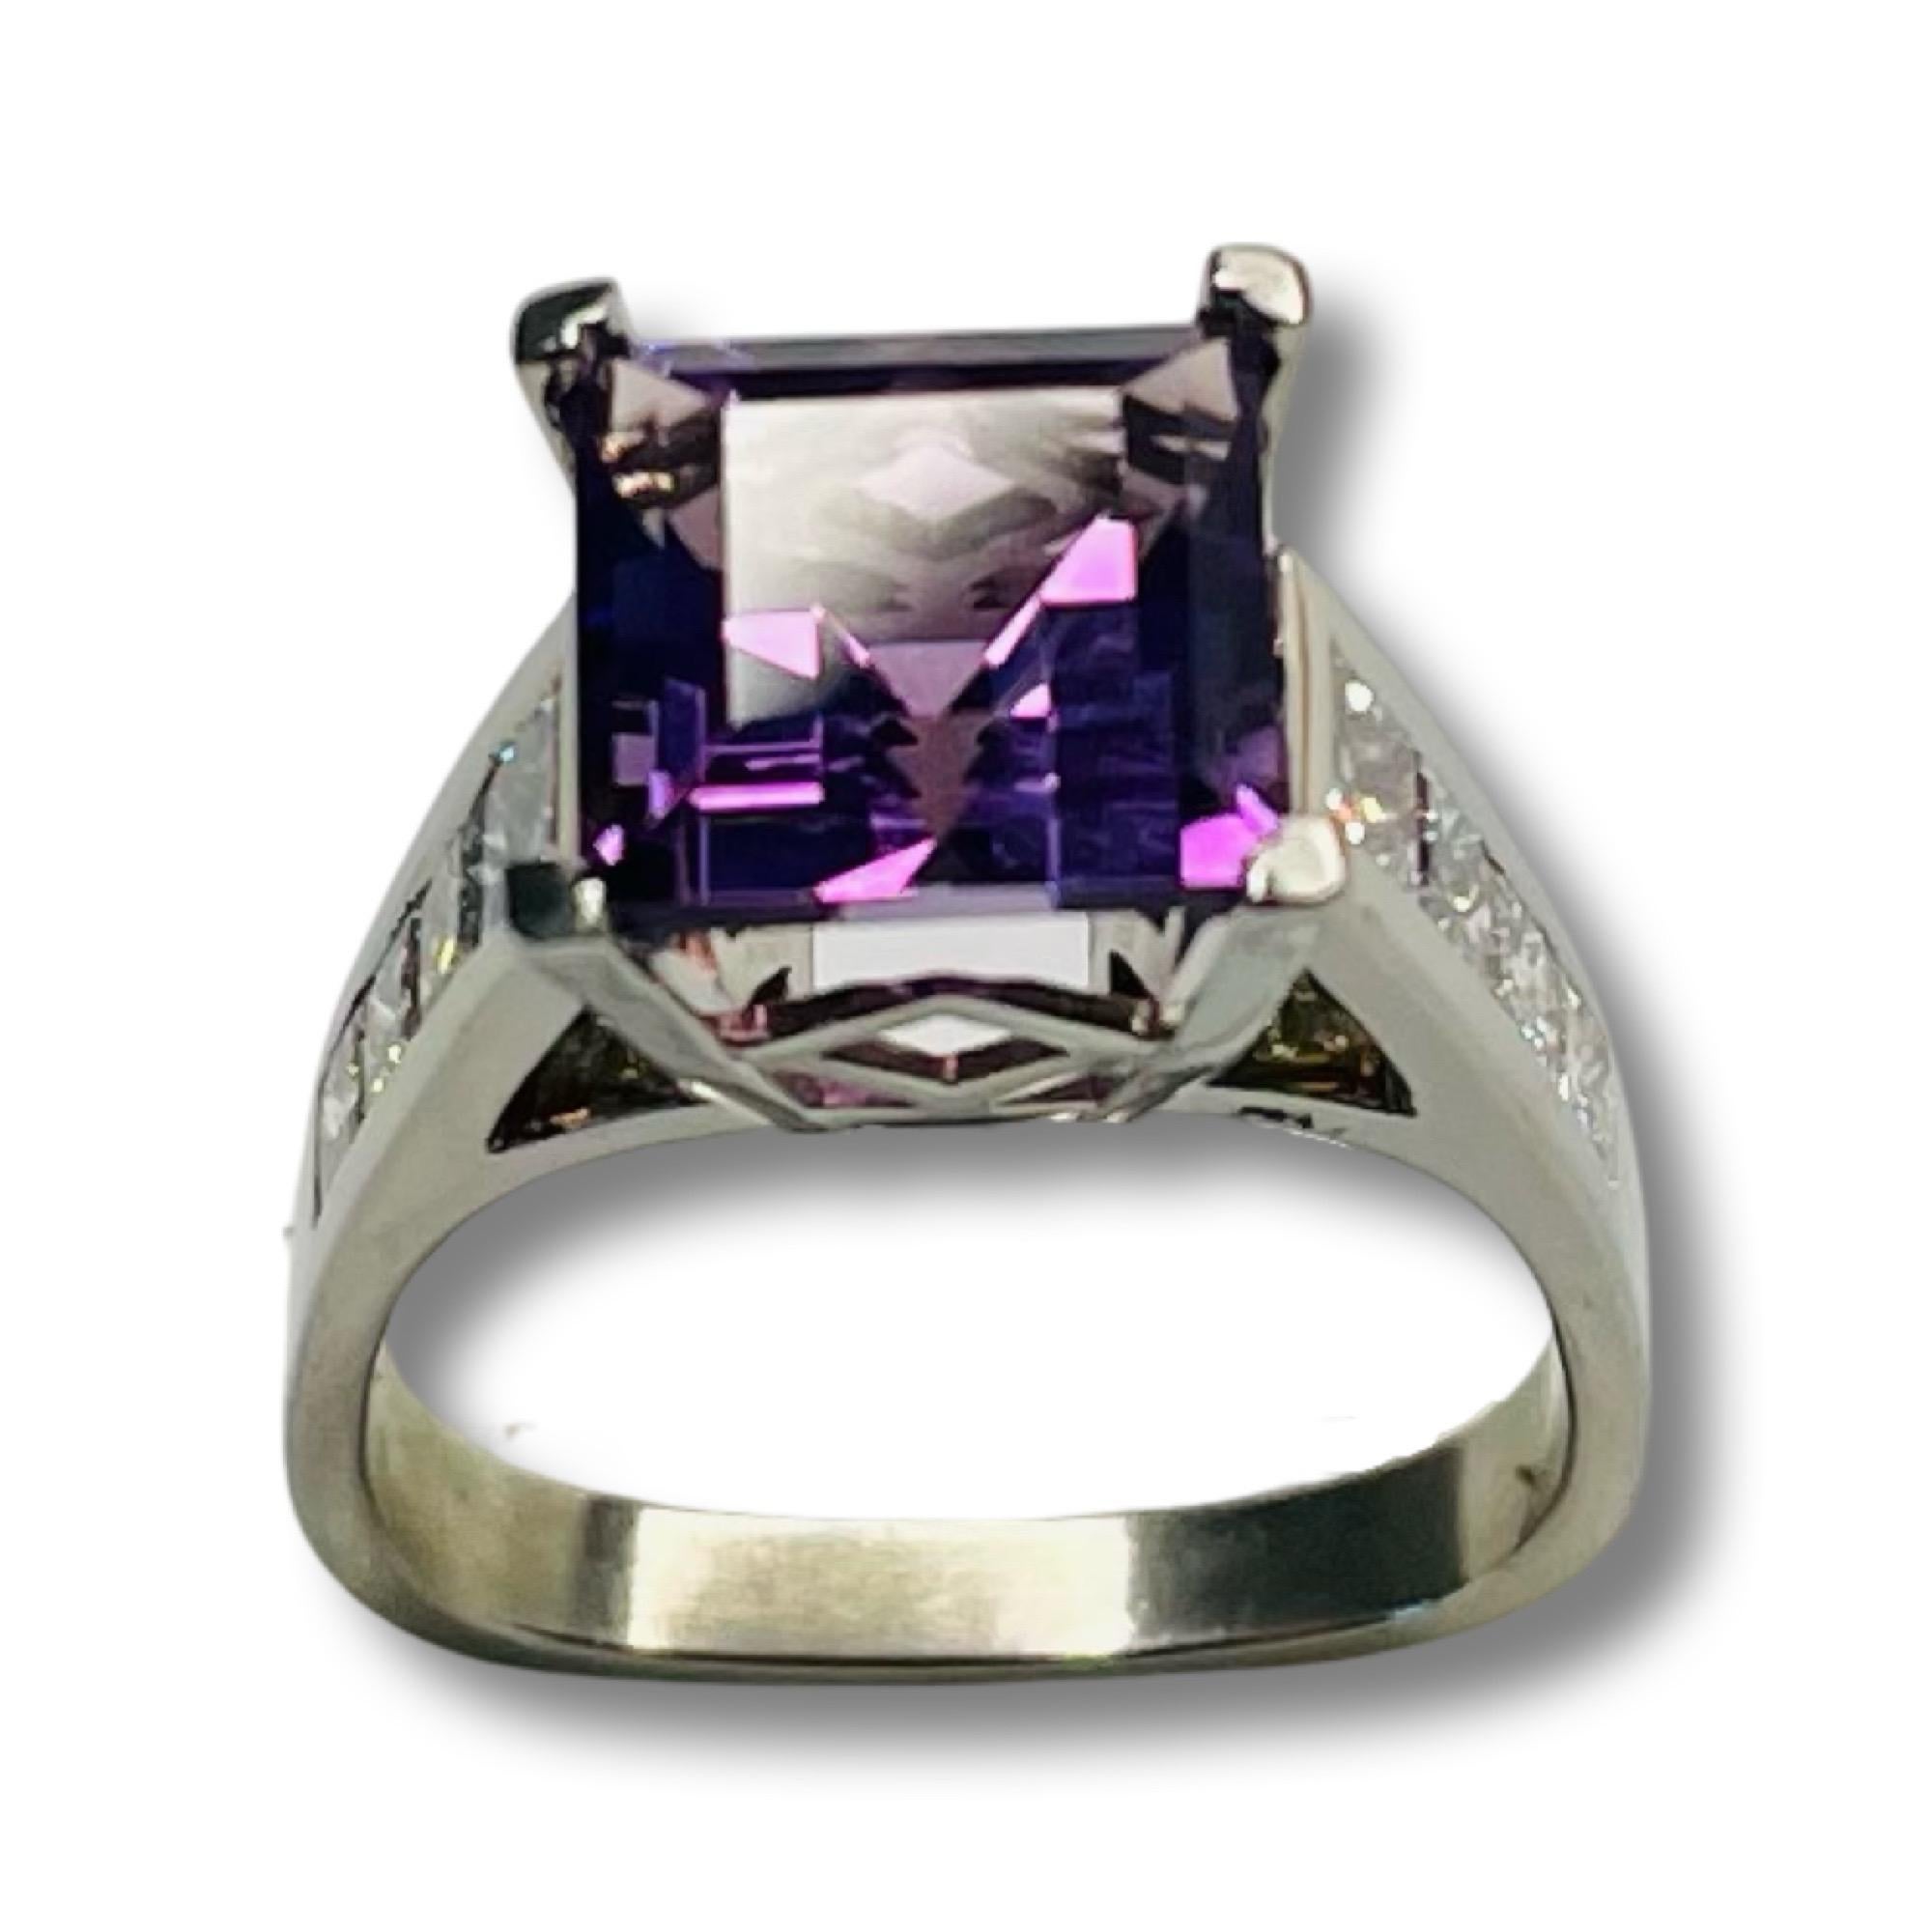 Jean-Francois Albert 18K White Gold Amethyst Diamond Ring. The center stone is a 9 mm step cut amethyst. It weighs 3.55 carats. It can be replaced with a colored stone, moissonite or natural or lab created diamond for an additional fee. There are 8